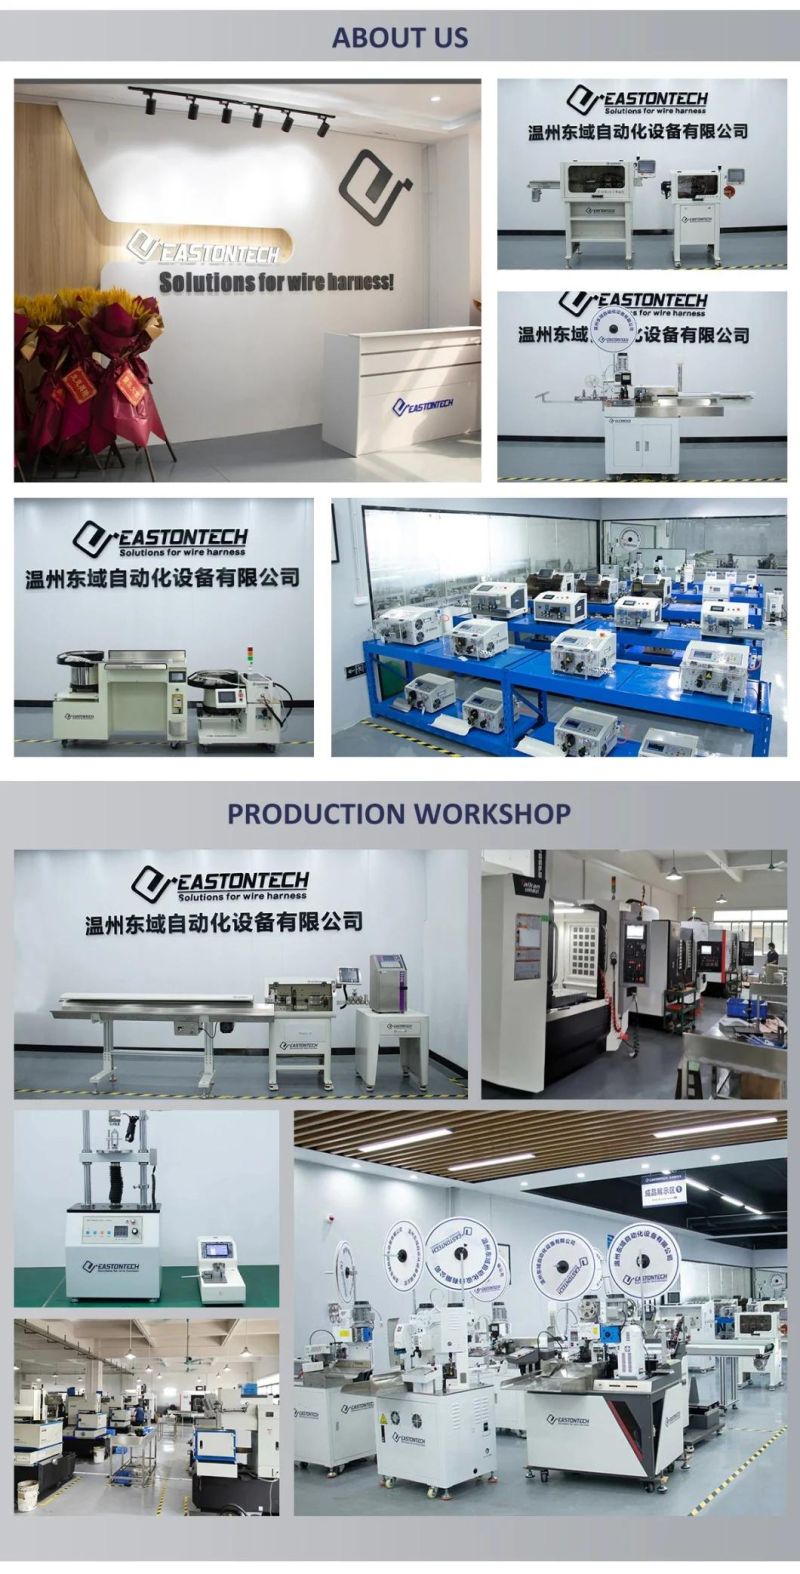 Eastontech Ew-02A Cable Manufacturing Equipment Mobile USB Cable Making Machine Automatic Computer Wire Stripping Peeling Cutting Machine